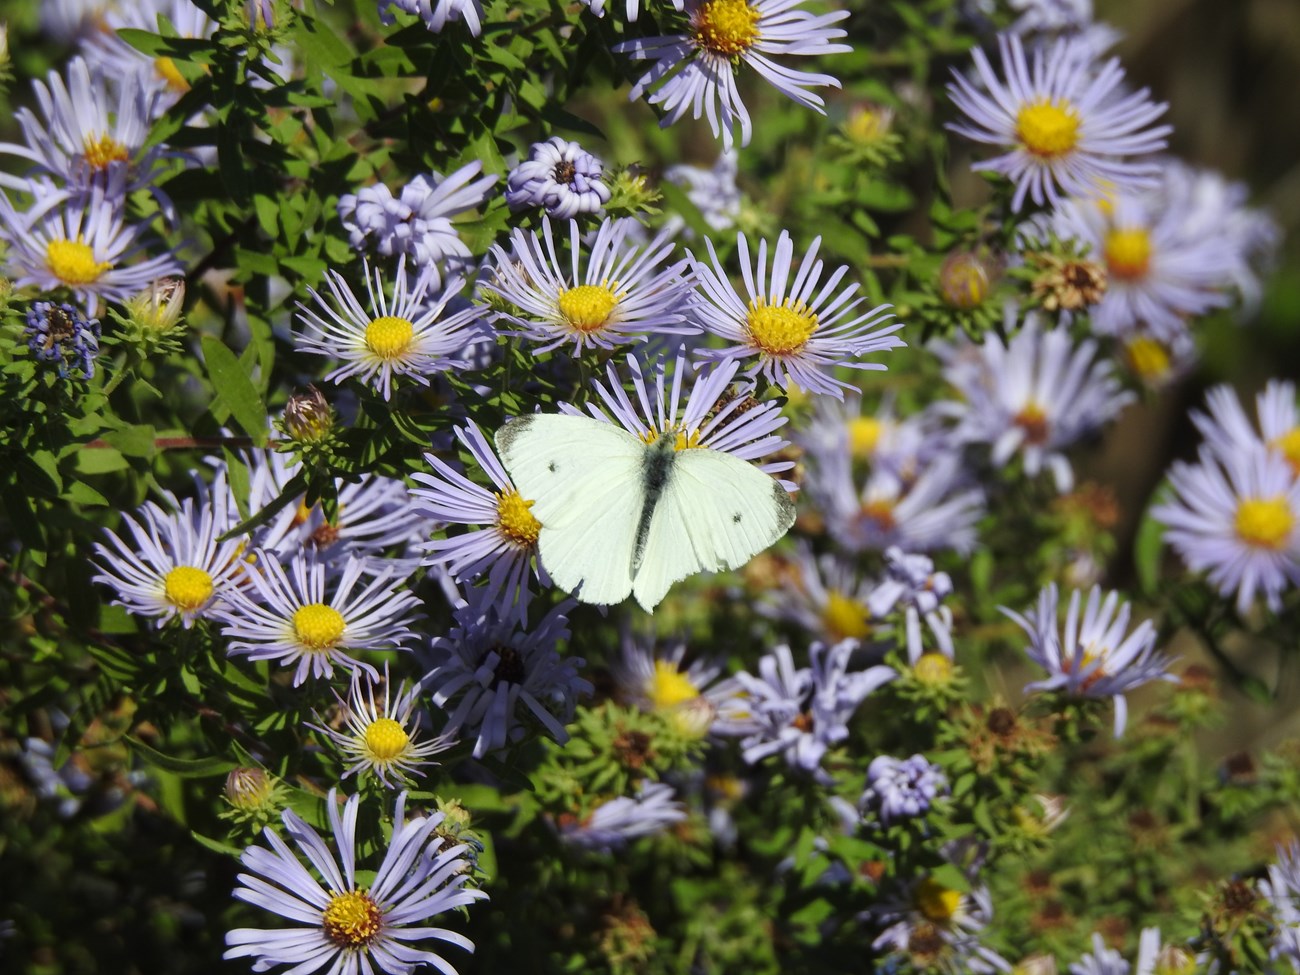 A white butterfly on a purple flower with a yellow center